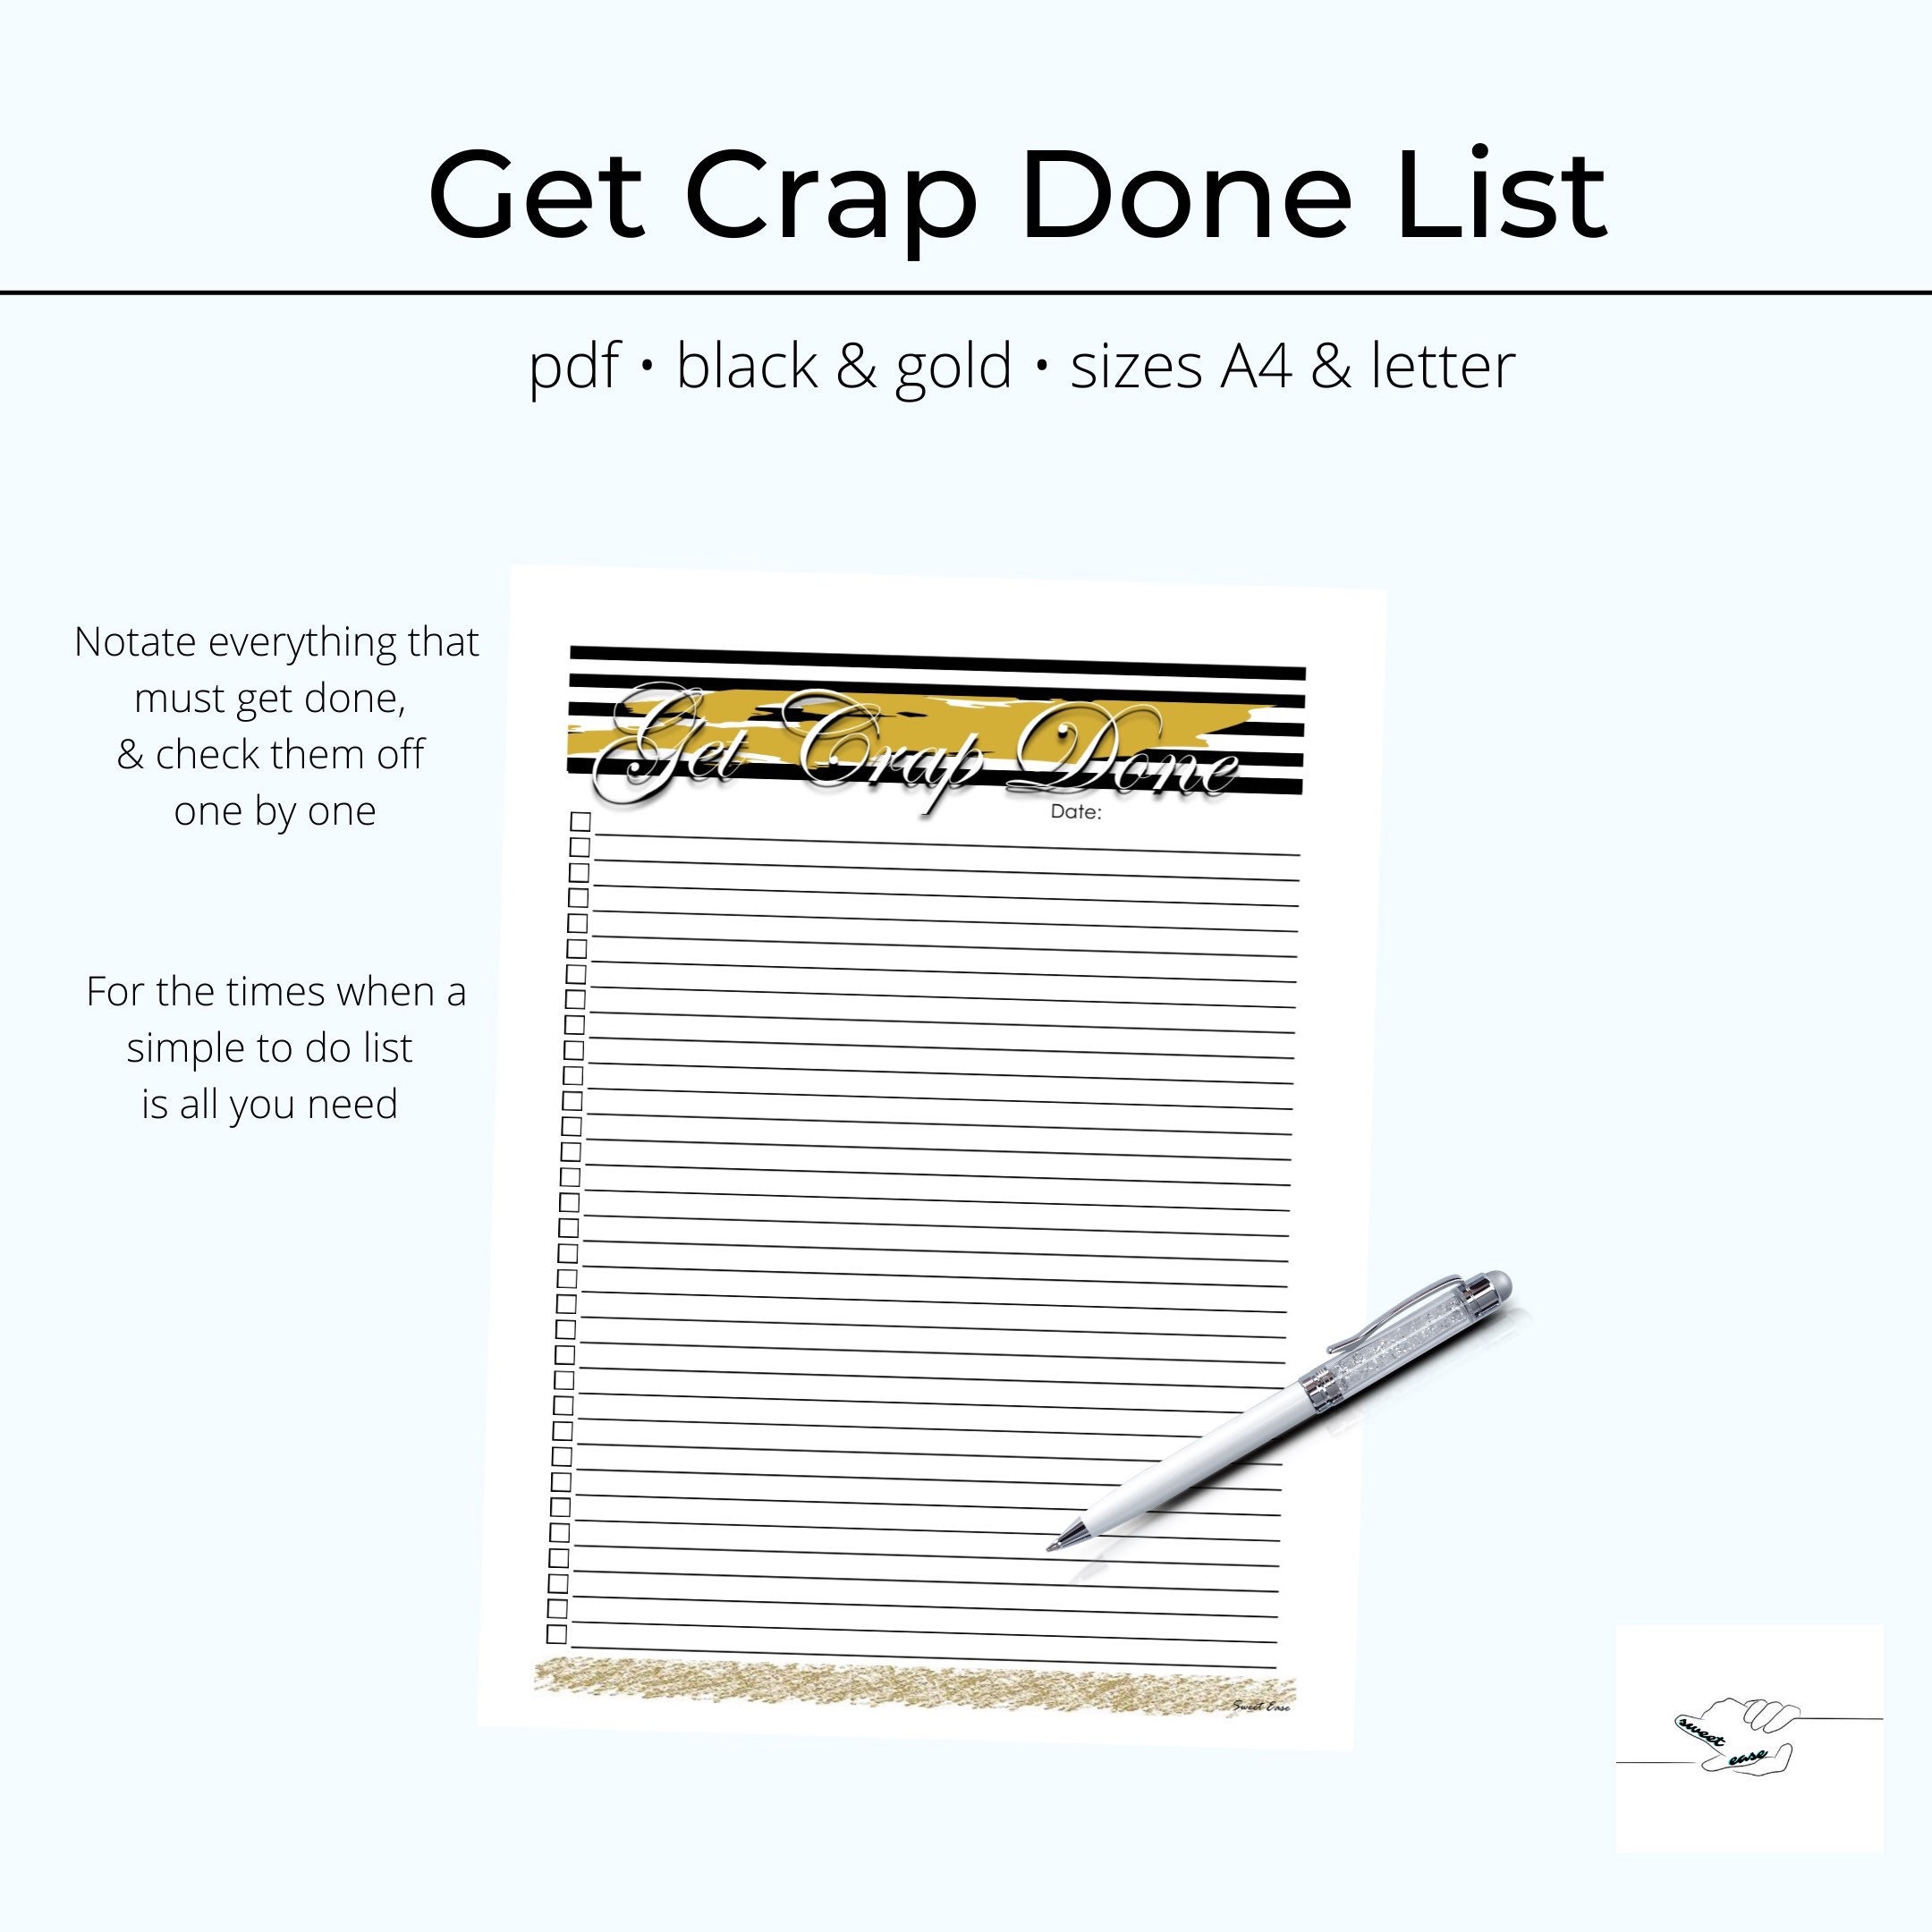 get-crap-done-daily-check-off-list-fillable-printable-funny-etsy